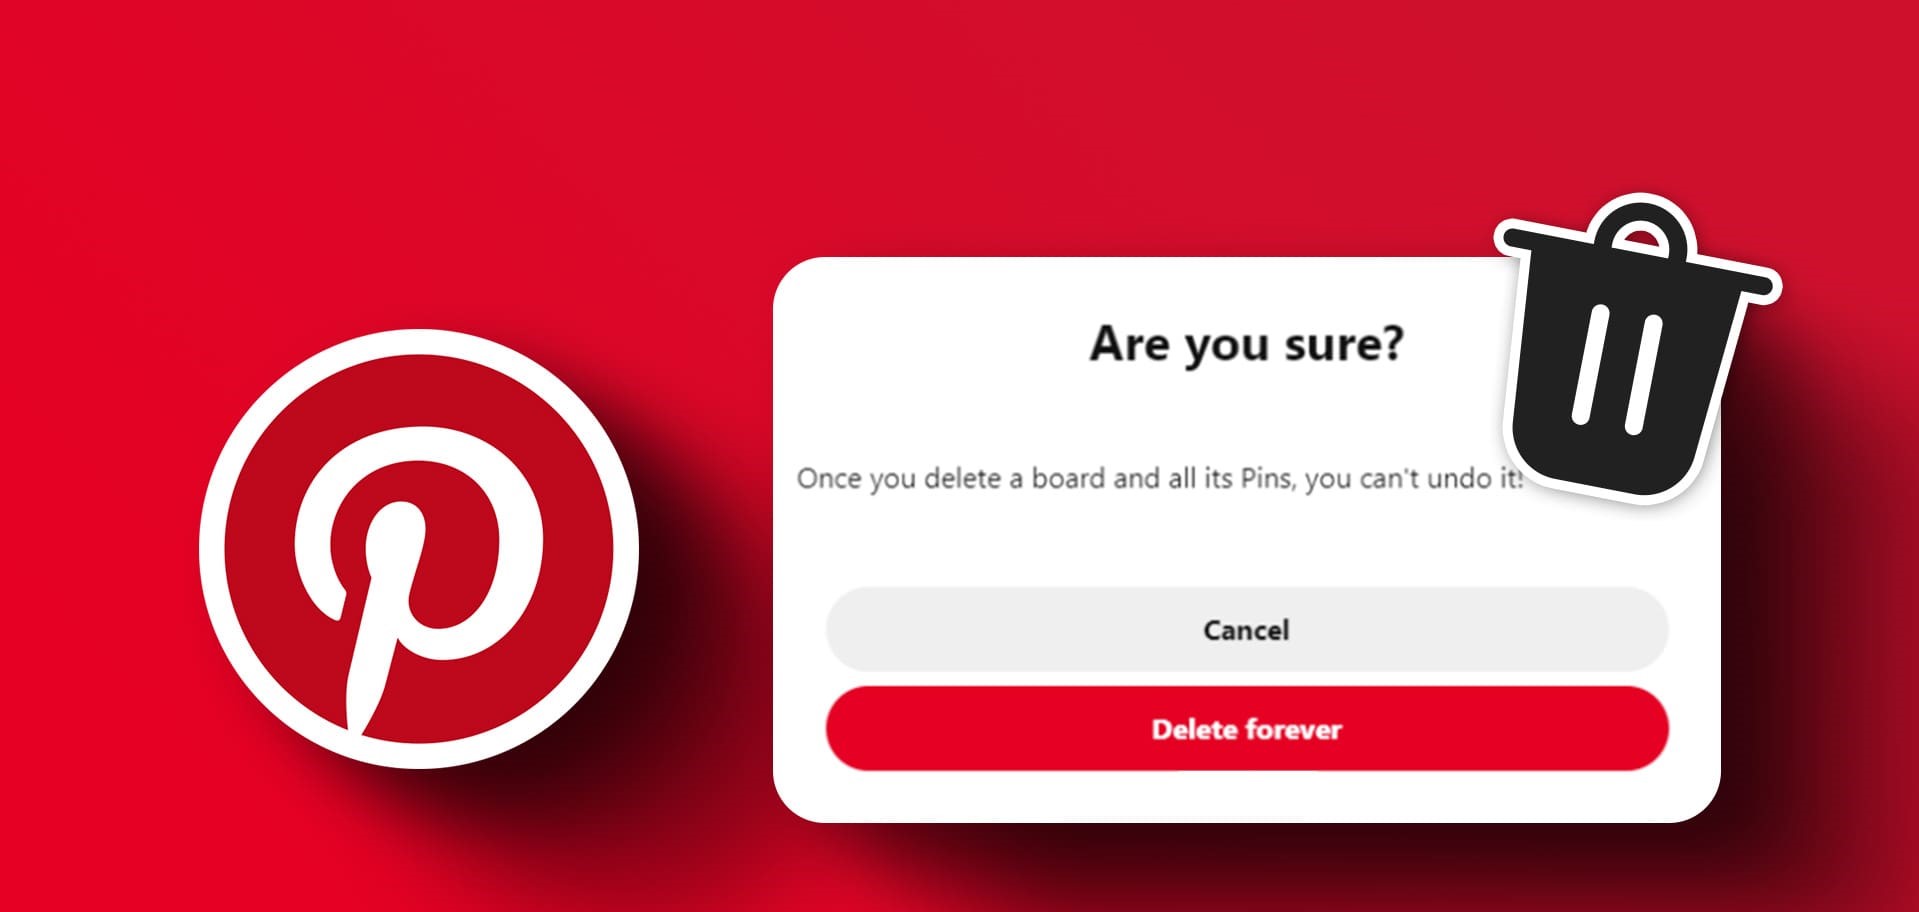 How To Delete A Board On Pinterest